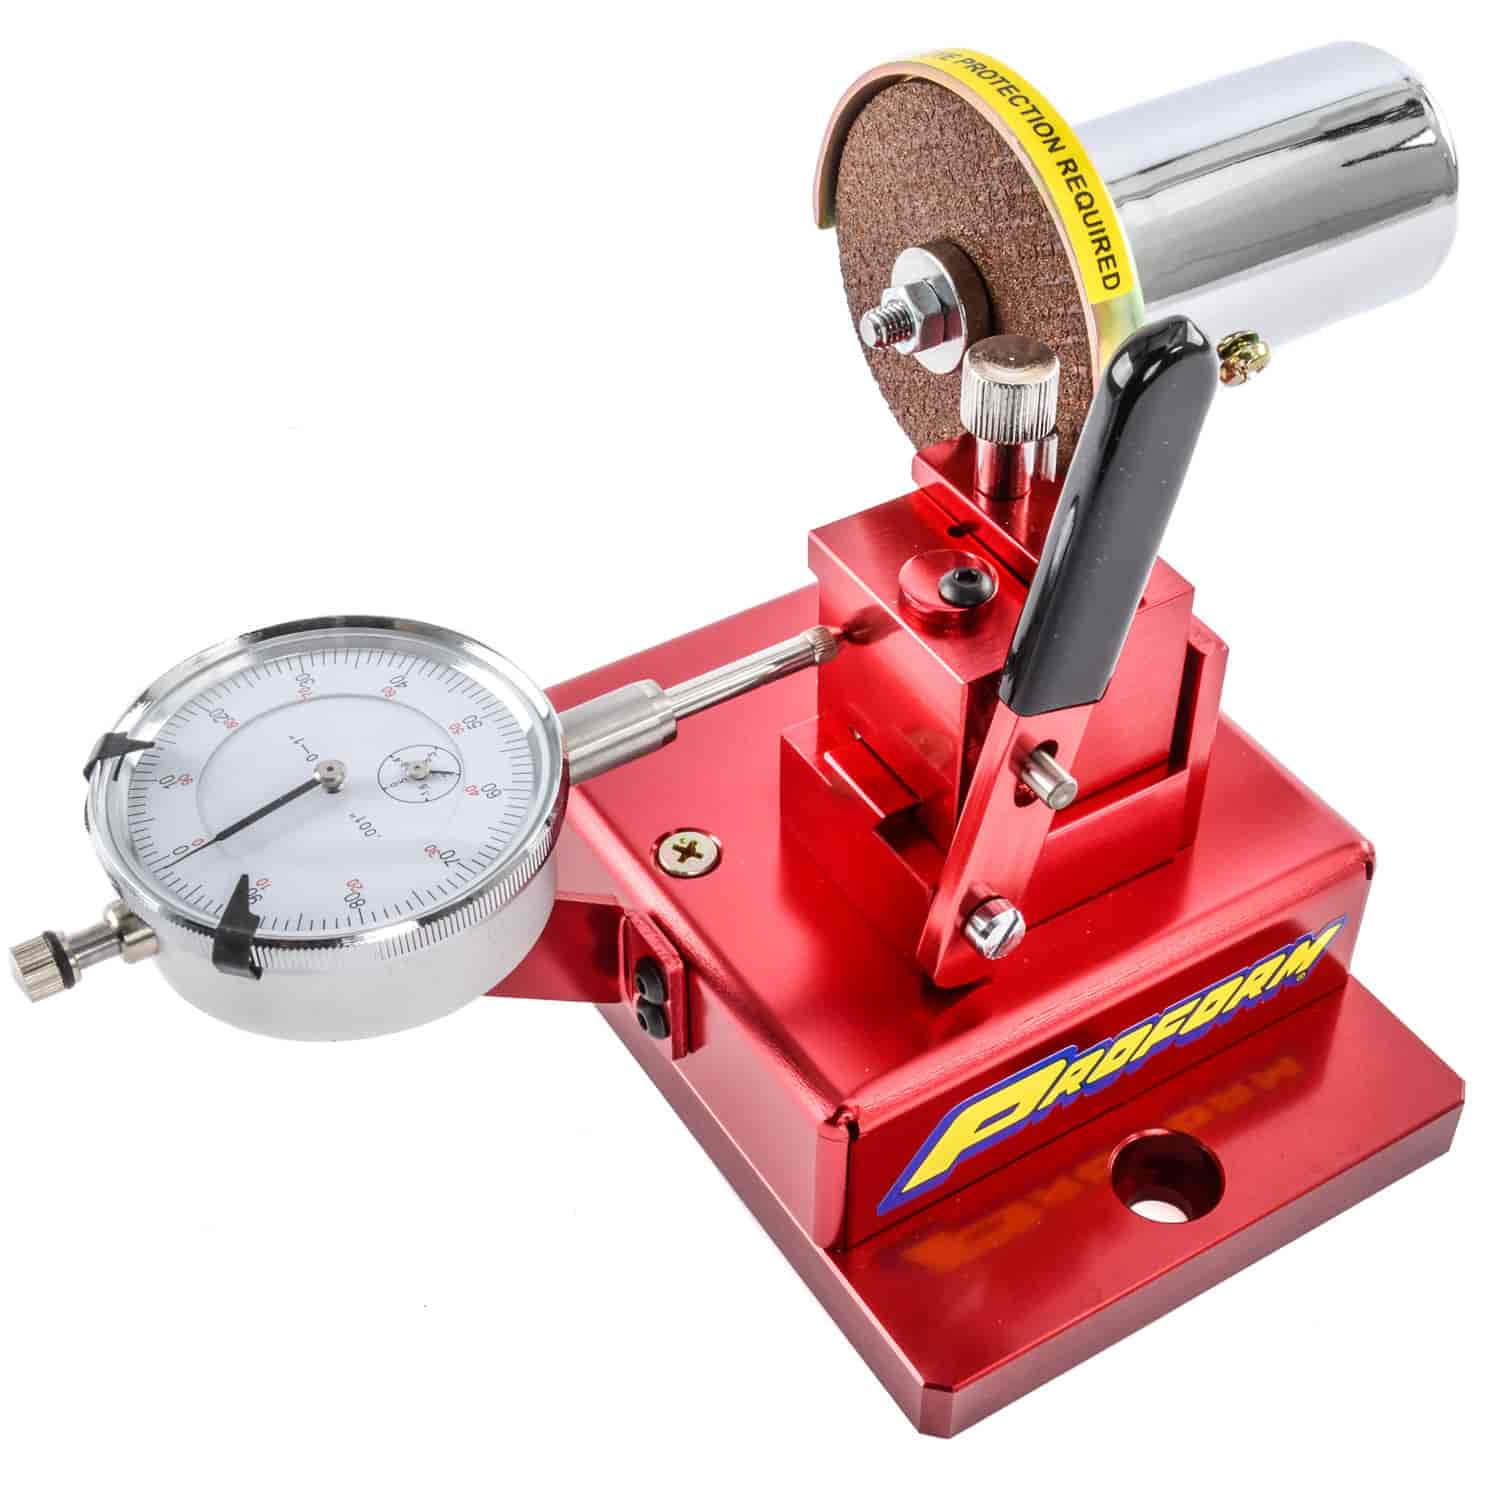 Proform 66765: Electric Piston Ring Filer Includes: 12v Rechargeable  Battery - JEGS